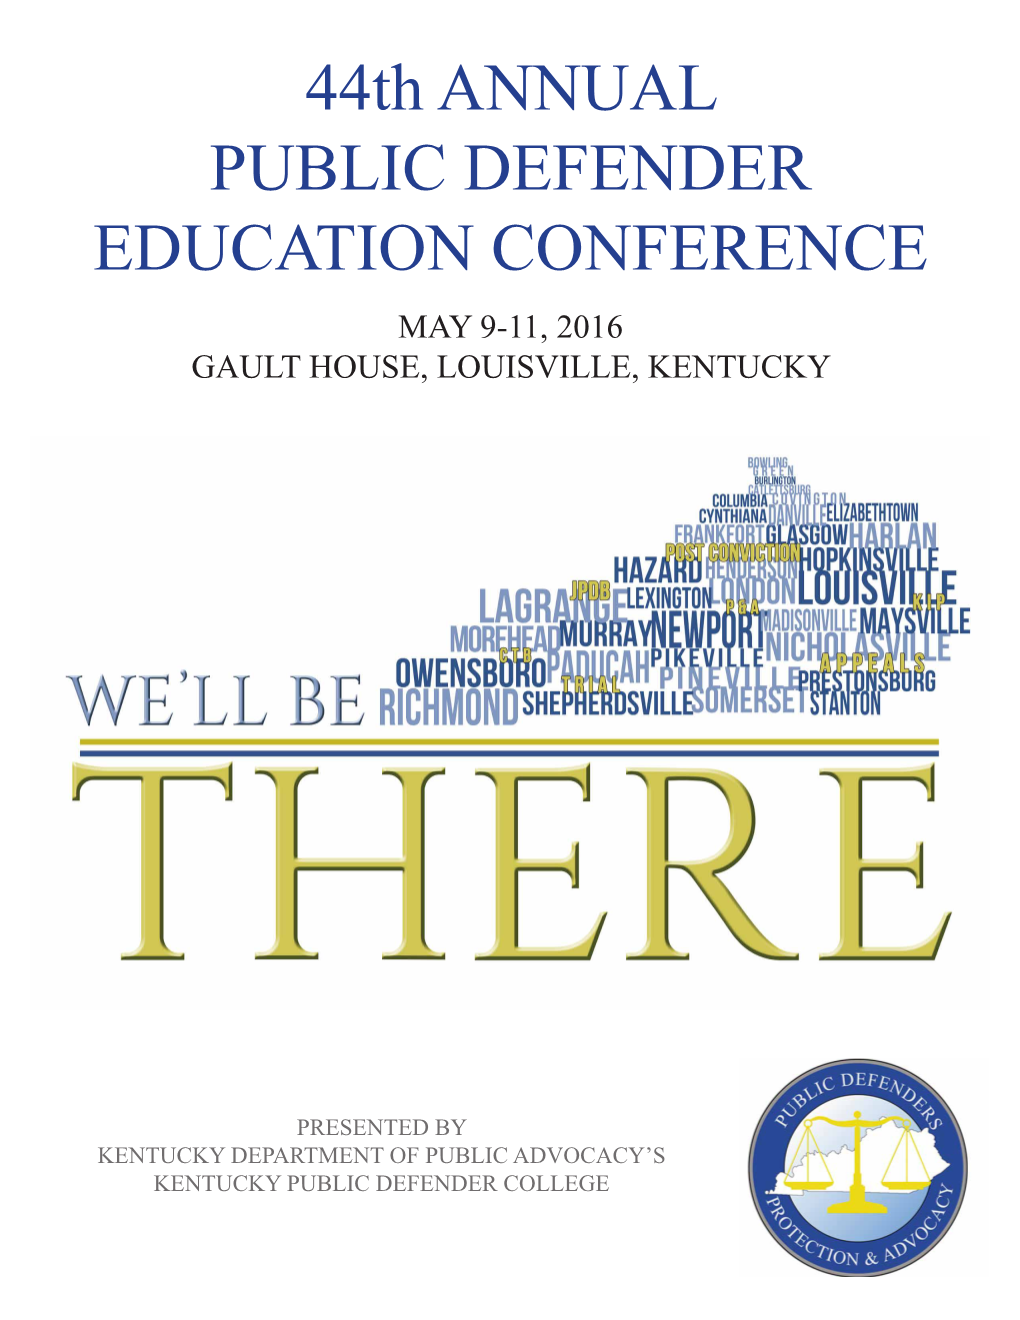 44Th ANNUAL PUBLIC DEFENDER EDUCATION CONFERENCE MAY 9-11, 2016 GAULT HOUSE, LOUISVILLE, KENTUCKY